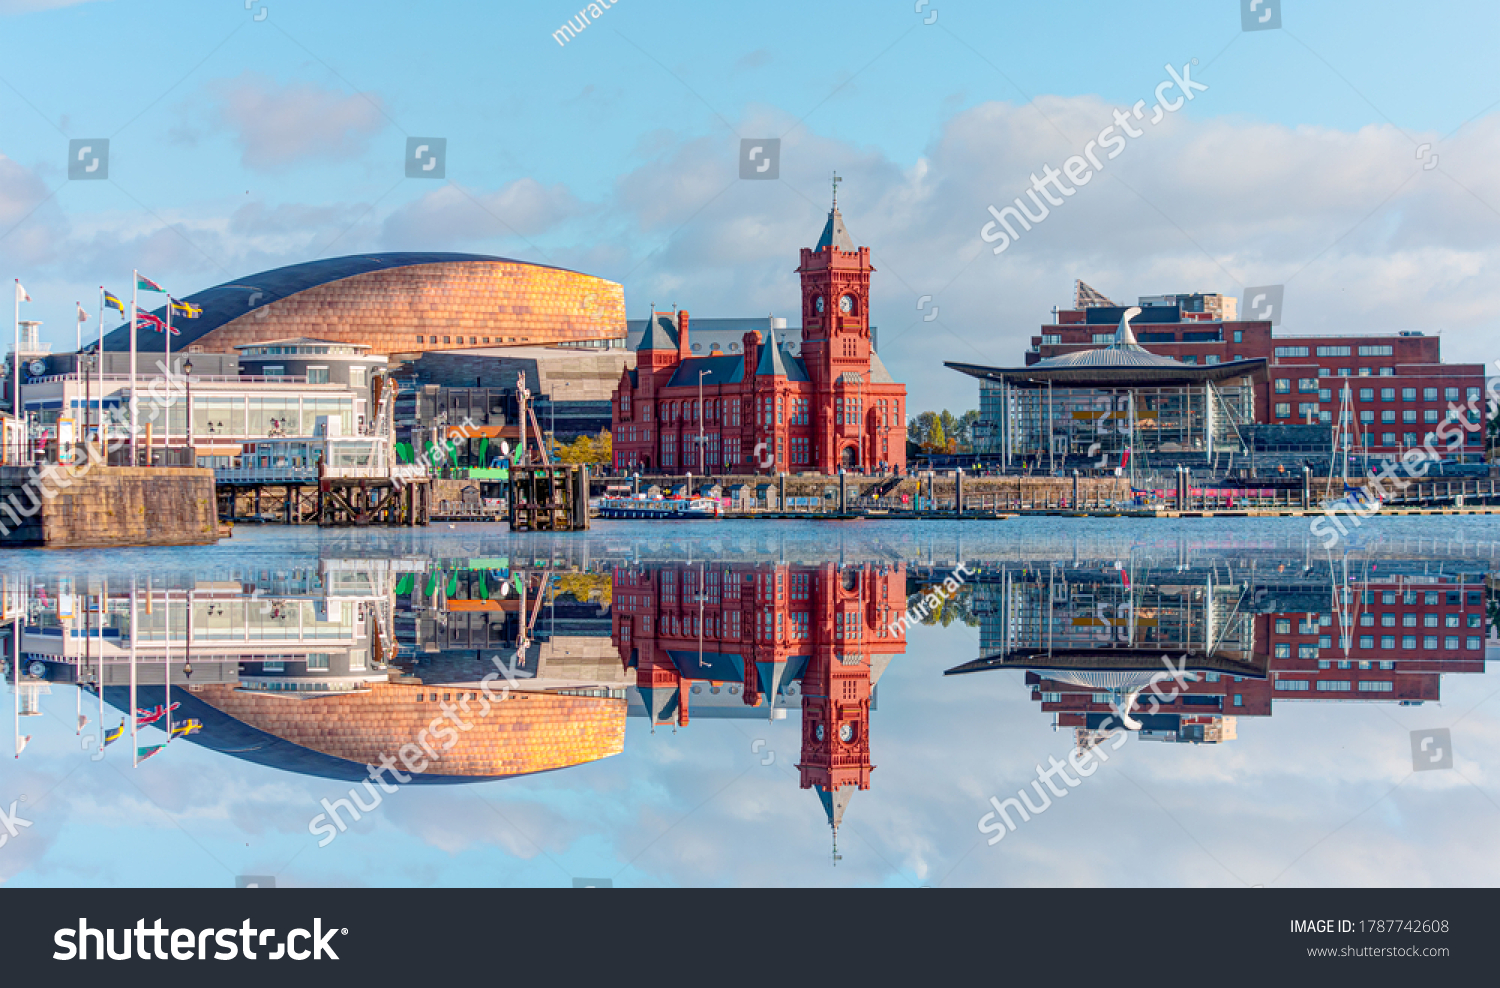 Panoramic view of the Cardiff Bay - Cardiff, Wales #1787742608